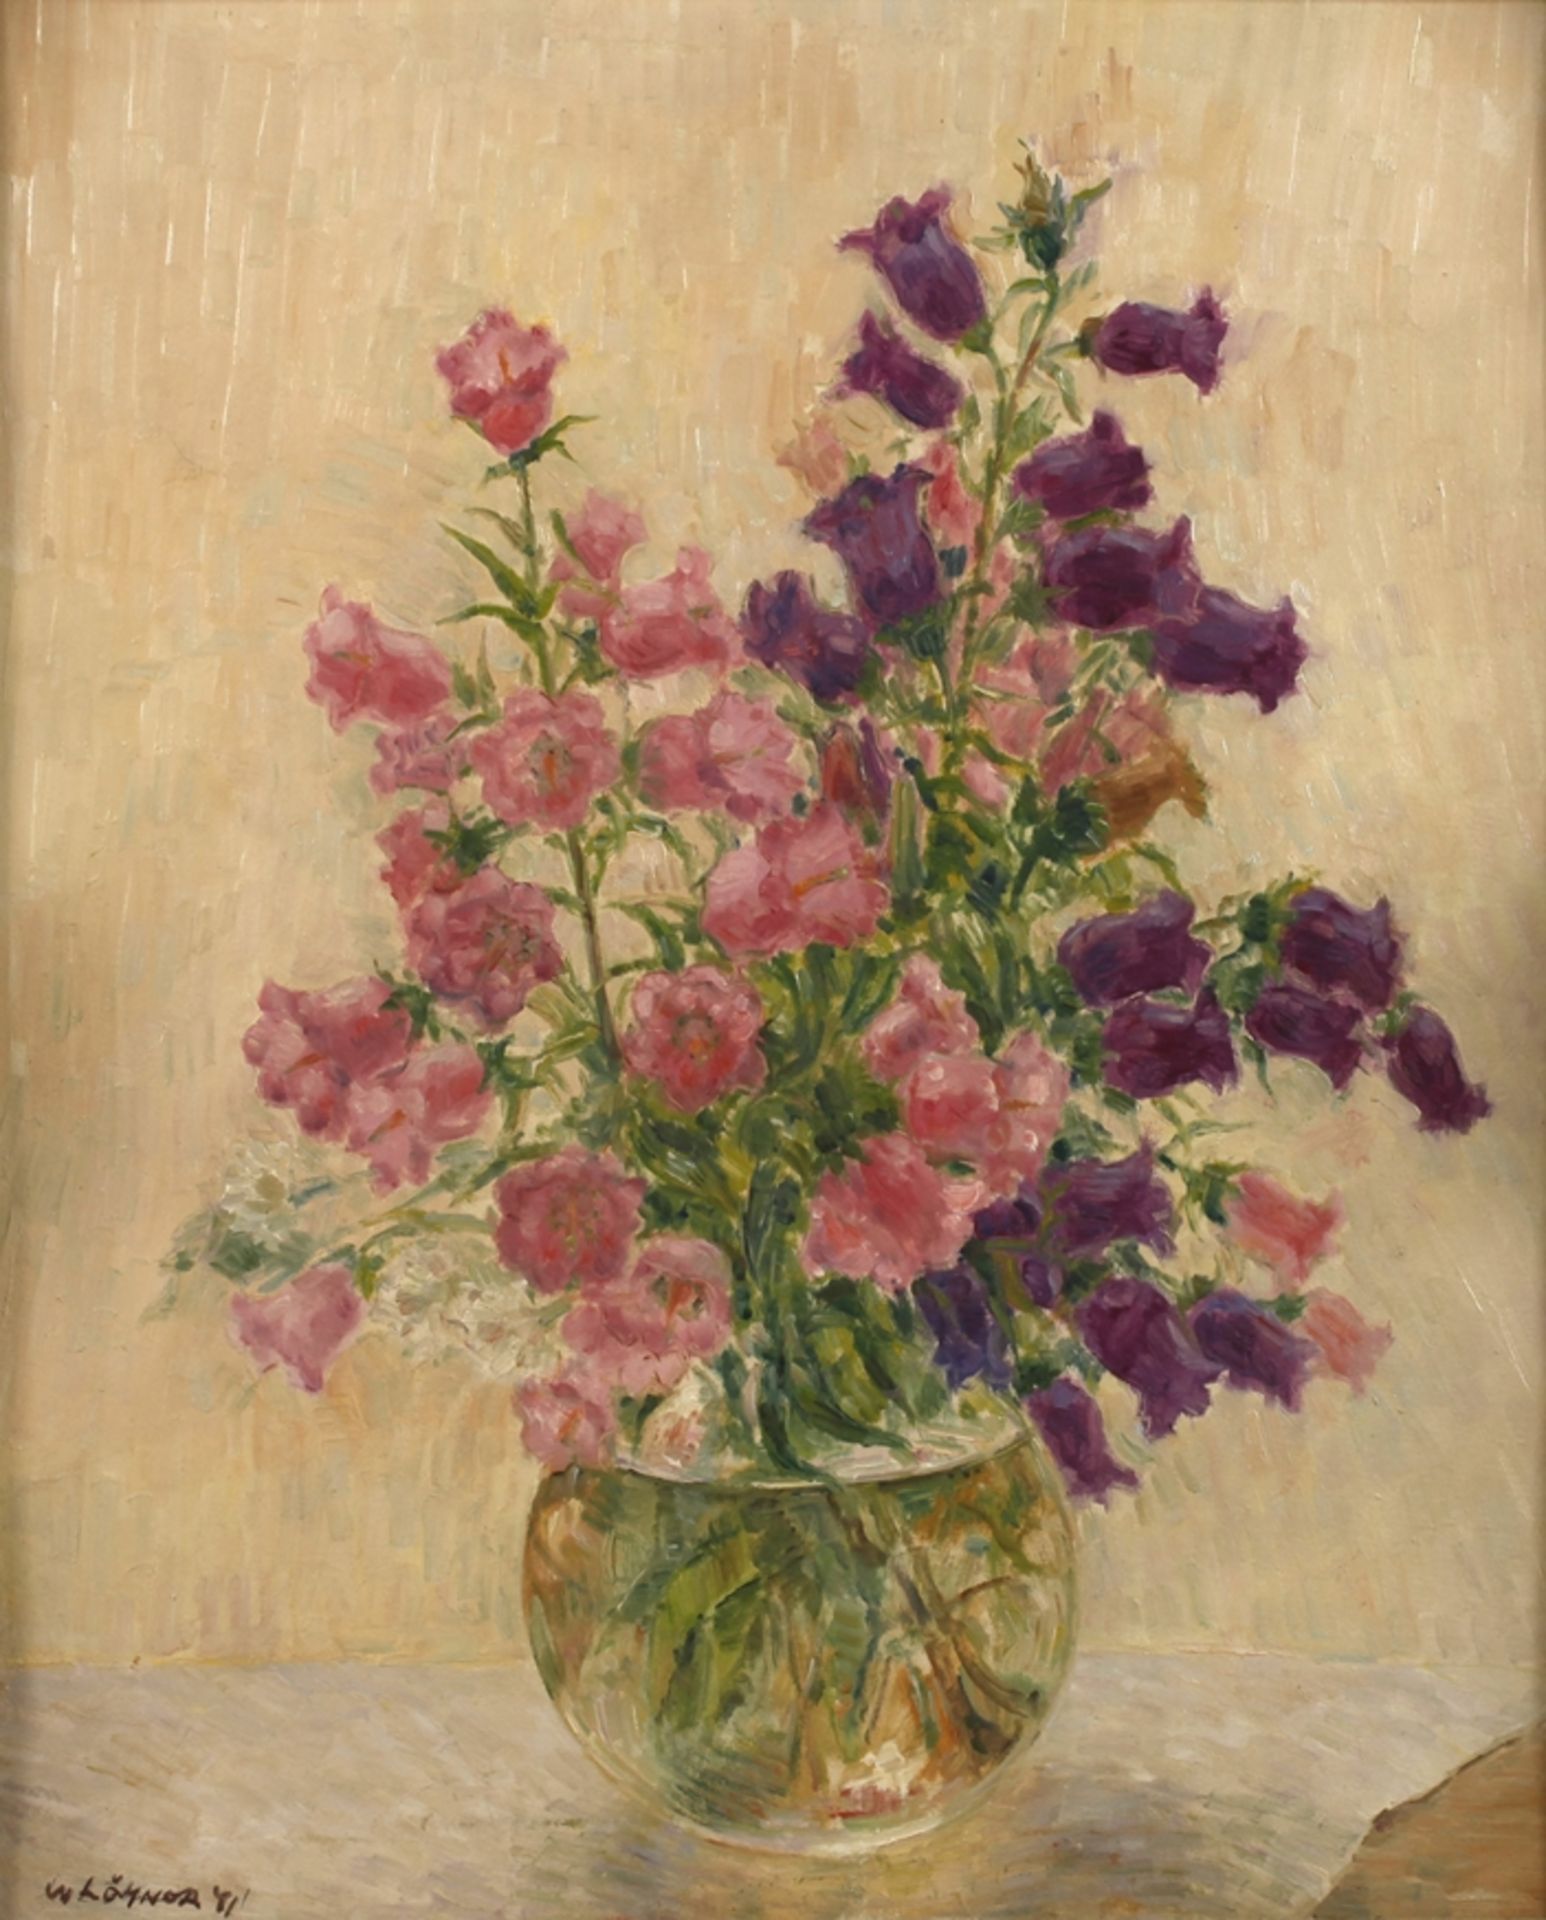 Walter Löhner, Bouquet of Vetches in a Glass Vase</b>